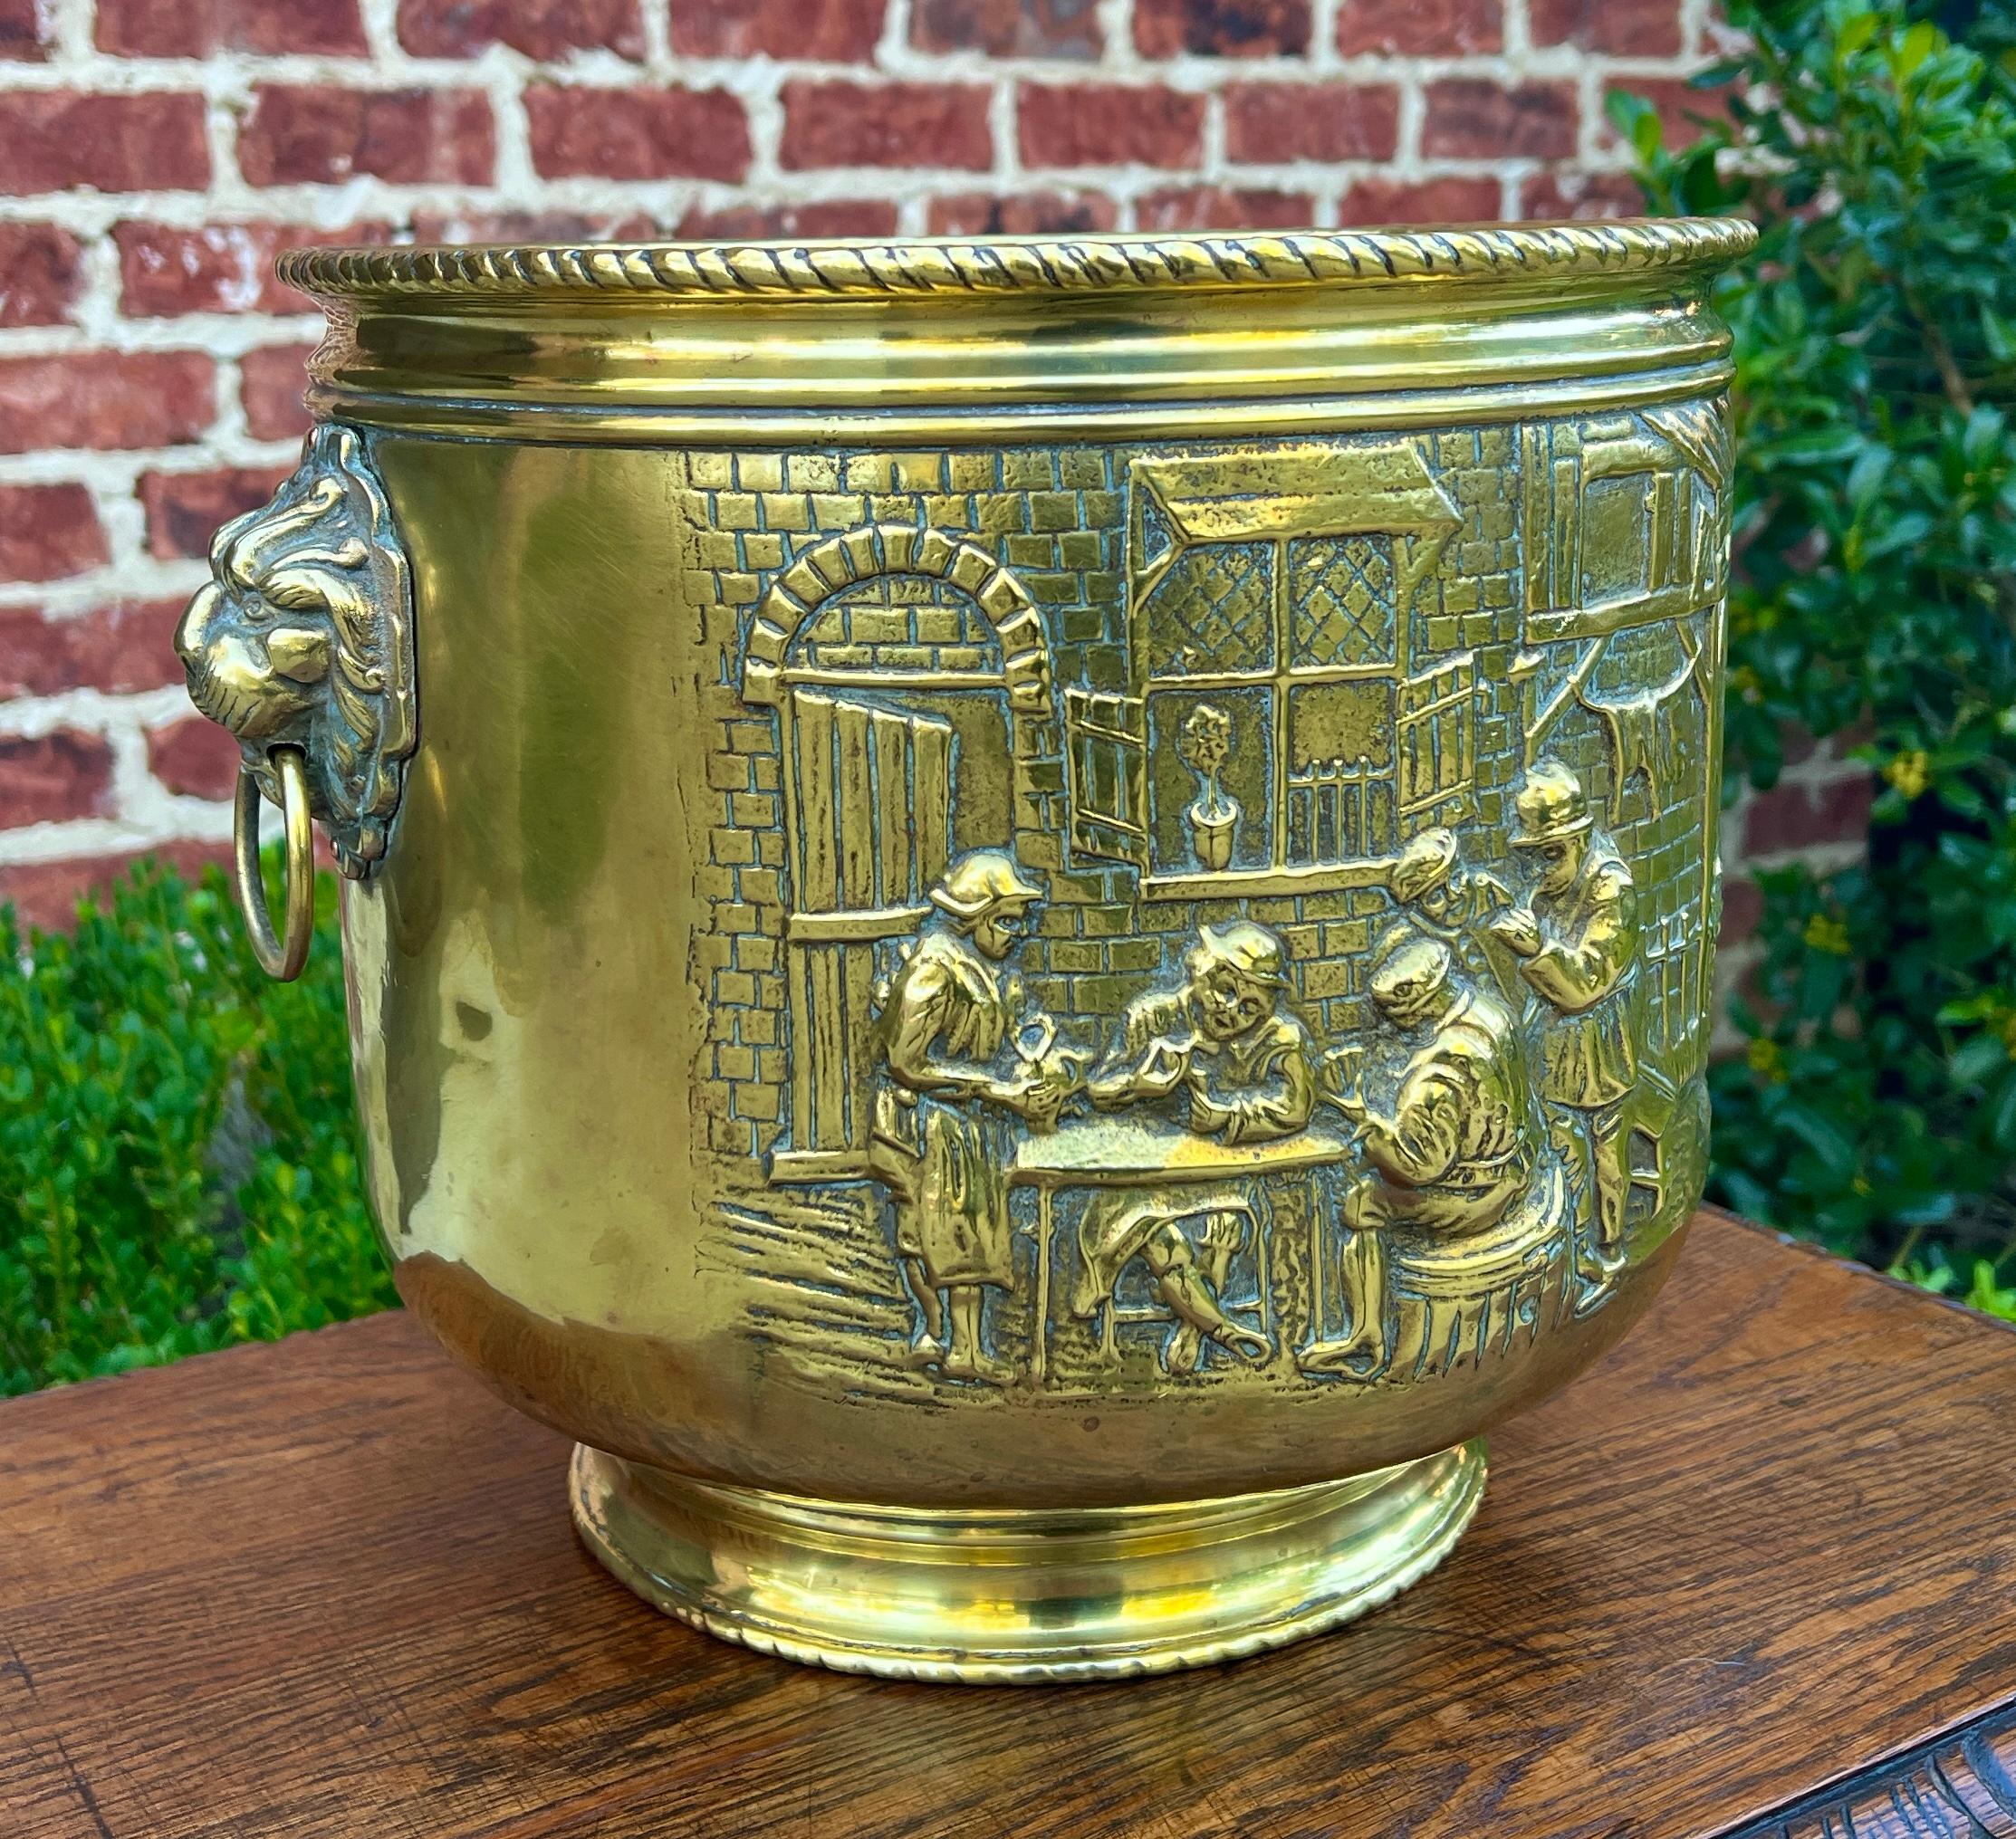 EXCELLENT Antique English Brass Planter Flower Pot Jardiniere with Lions Heads and Pub Scene~~c. 1930

Beautiful decorative brass planter~~excellent repousse' depicting pub scenes with lions' heads and side ring handles


        11.5